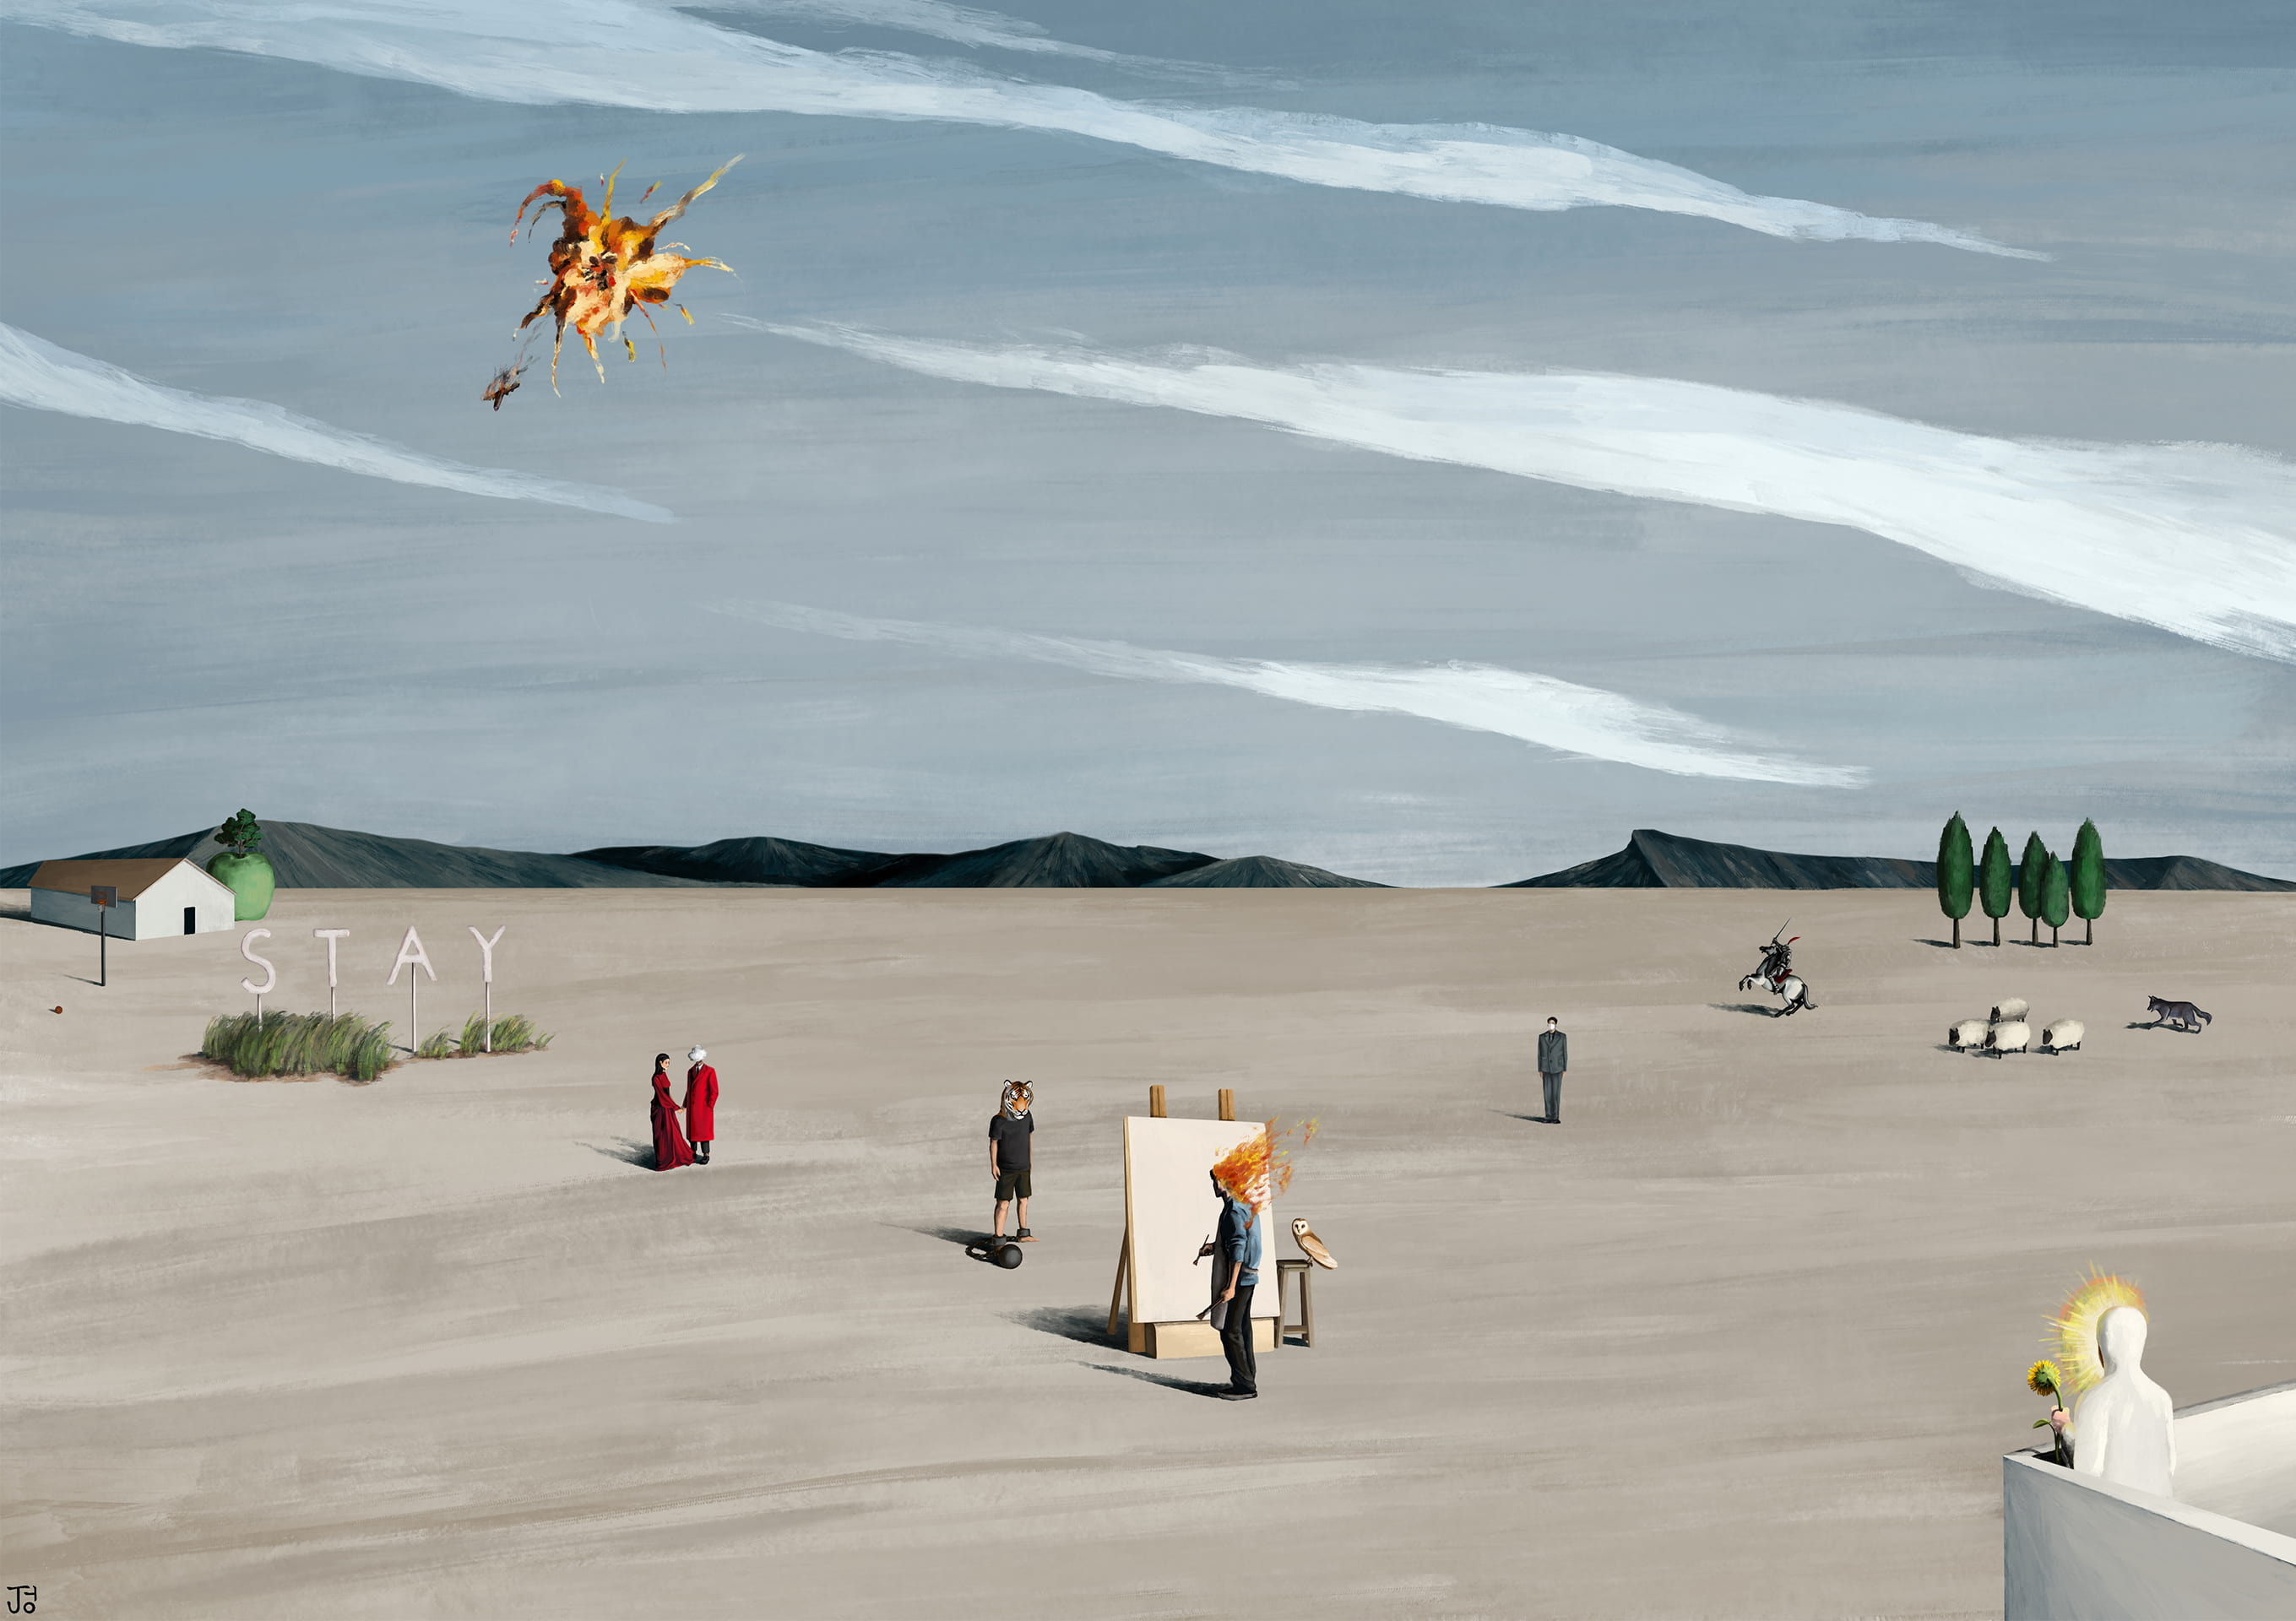 Airplane explosion in the clear blue sky. In the centre of the vast deserted landscape, there's an artist with a burning head with his canvas and an owl. On his left stands a chained man with the head of a tiger, men with a cloud head and a woman dressed in red, a notice-board stating 'STAY', and a house with a basketball court and a giant green apple in its yard. On the right, there stands a man in a grey suit, a knight, four sheep, a wolf, and five trees. At the front right corner stands a holy spirit.   